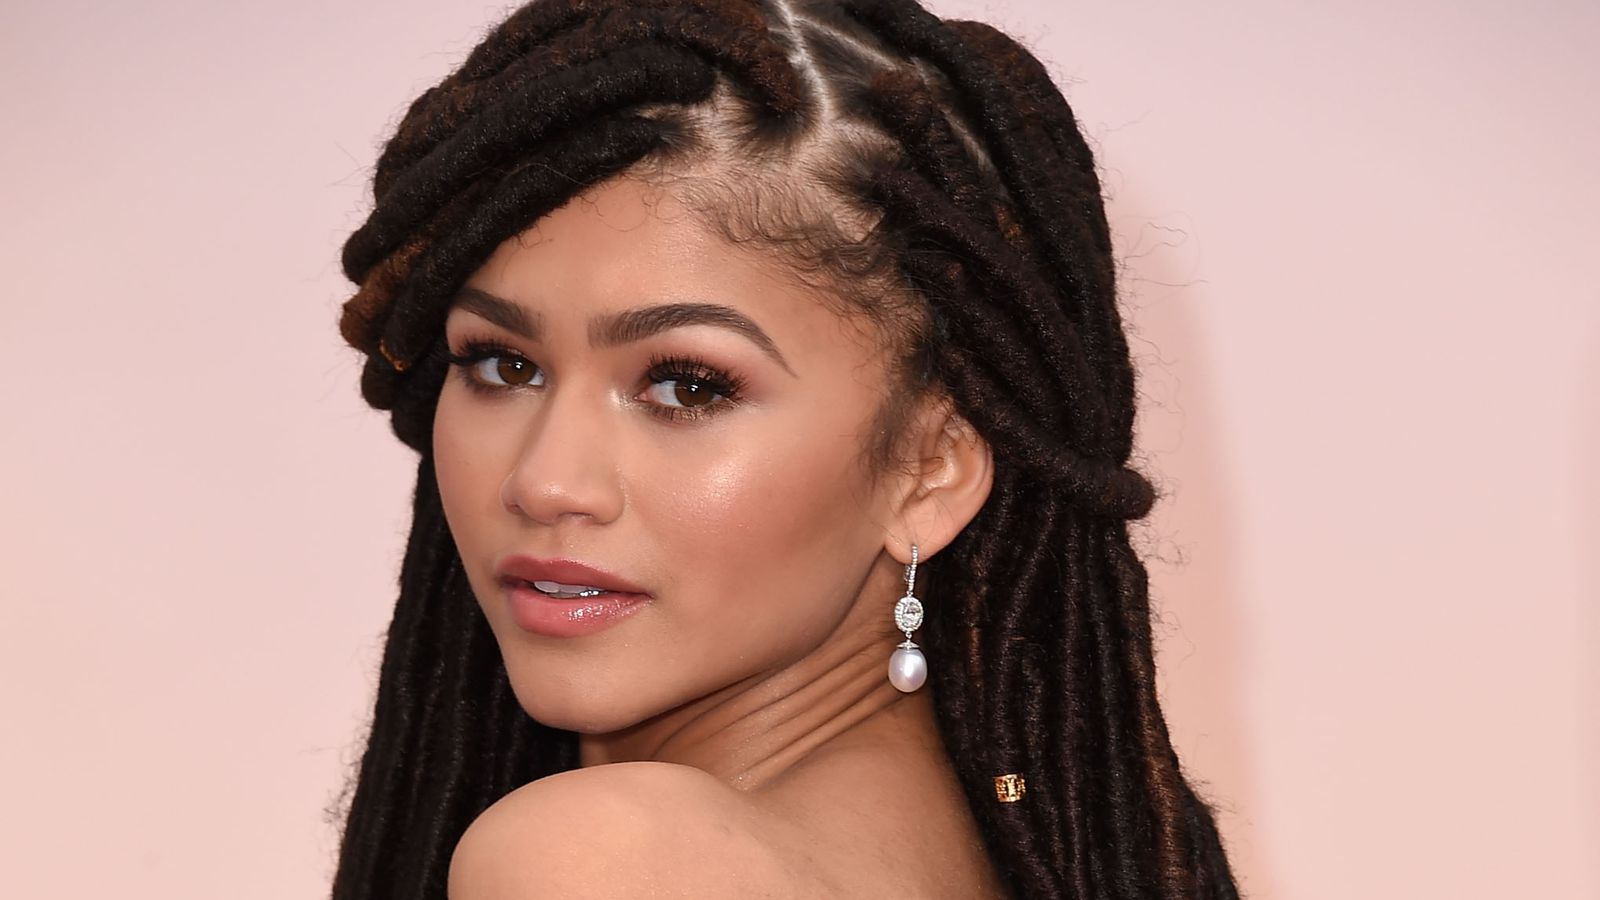 A Closer Look At Zendaya's Ethnicity, Parents And Siblings